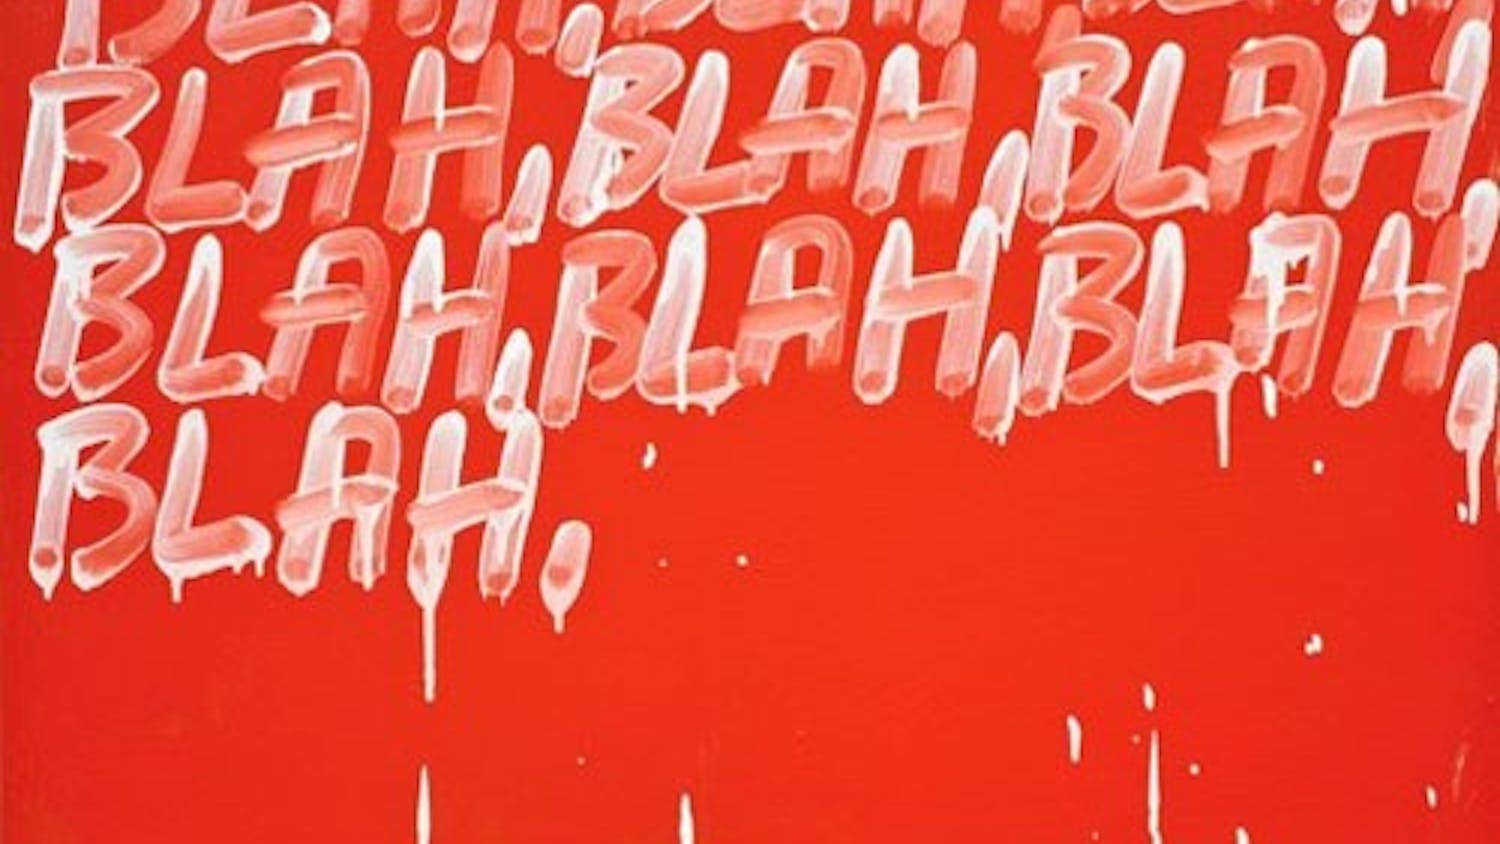 Mel Bochnerâ€™s exhibit uses collections of synonyms and slang against vibrant colors